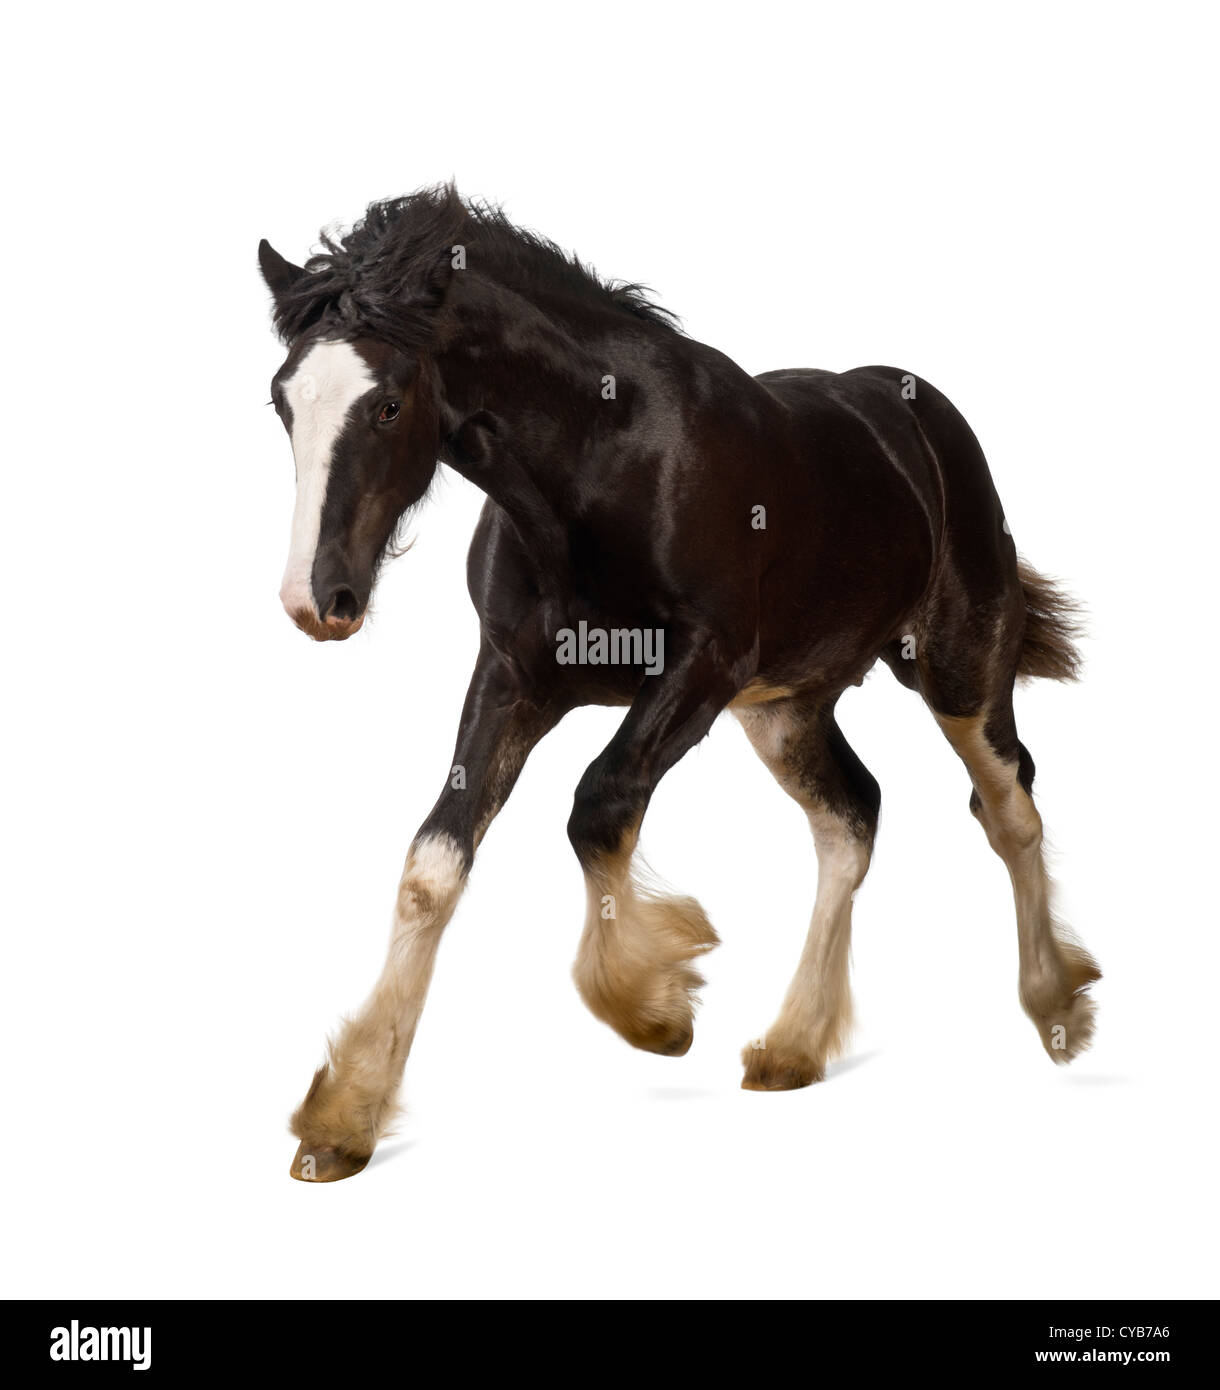 Shire horse foal galloping against white background Stock Photo